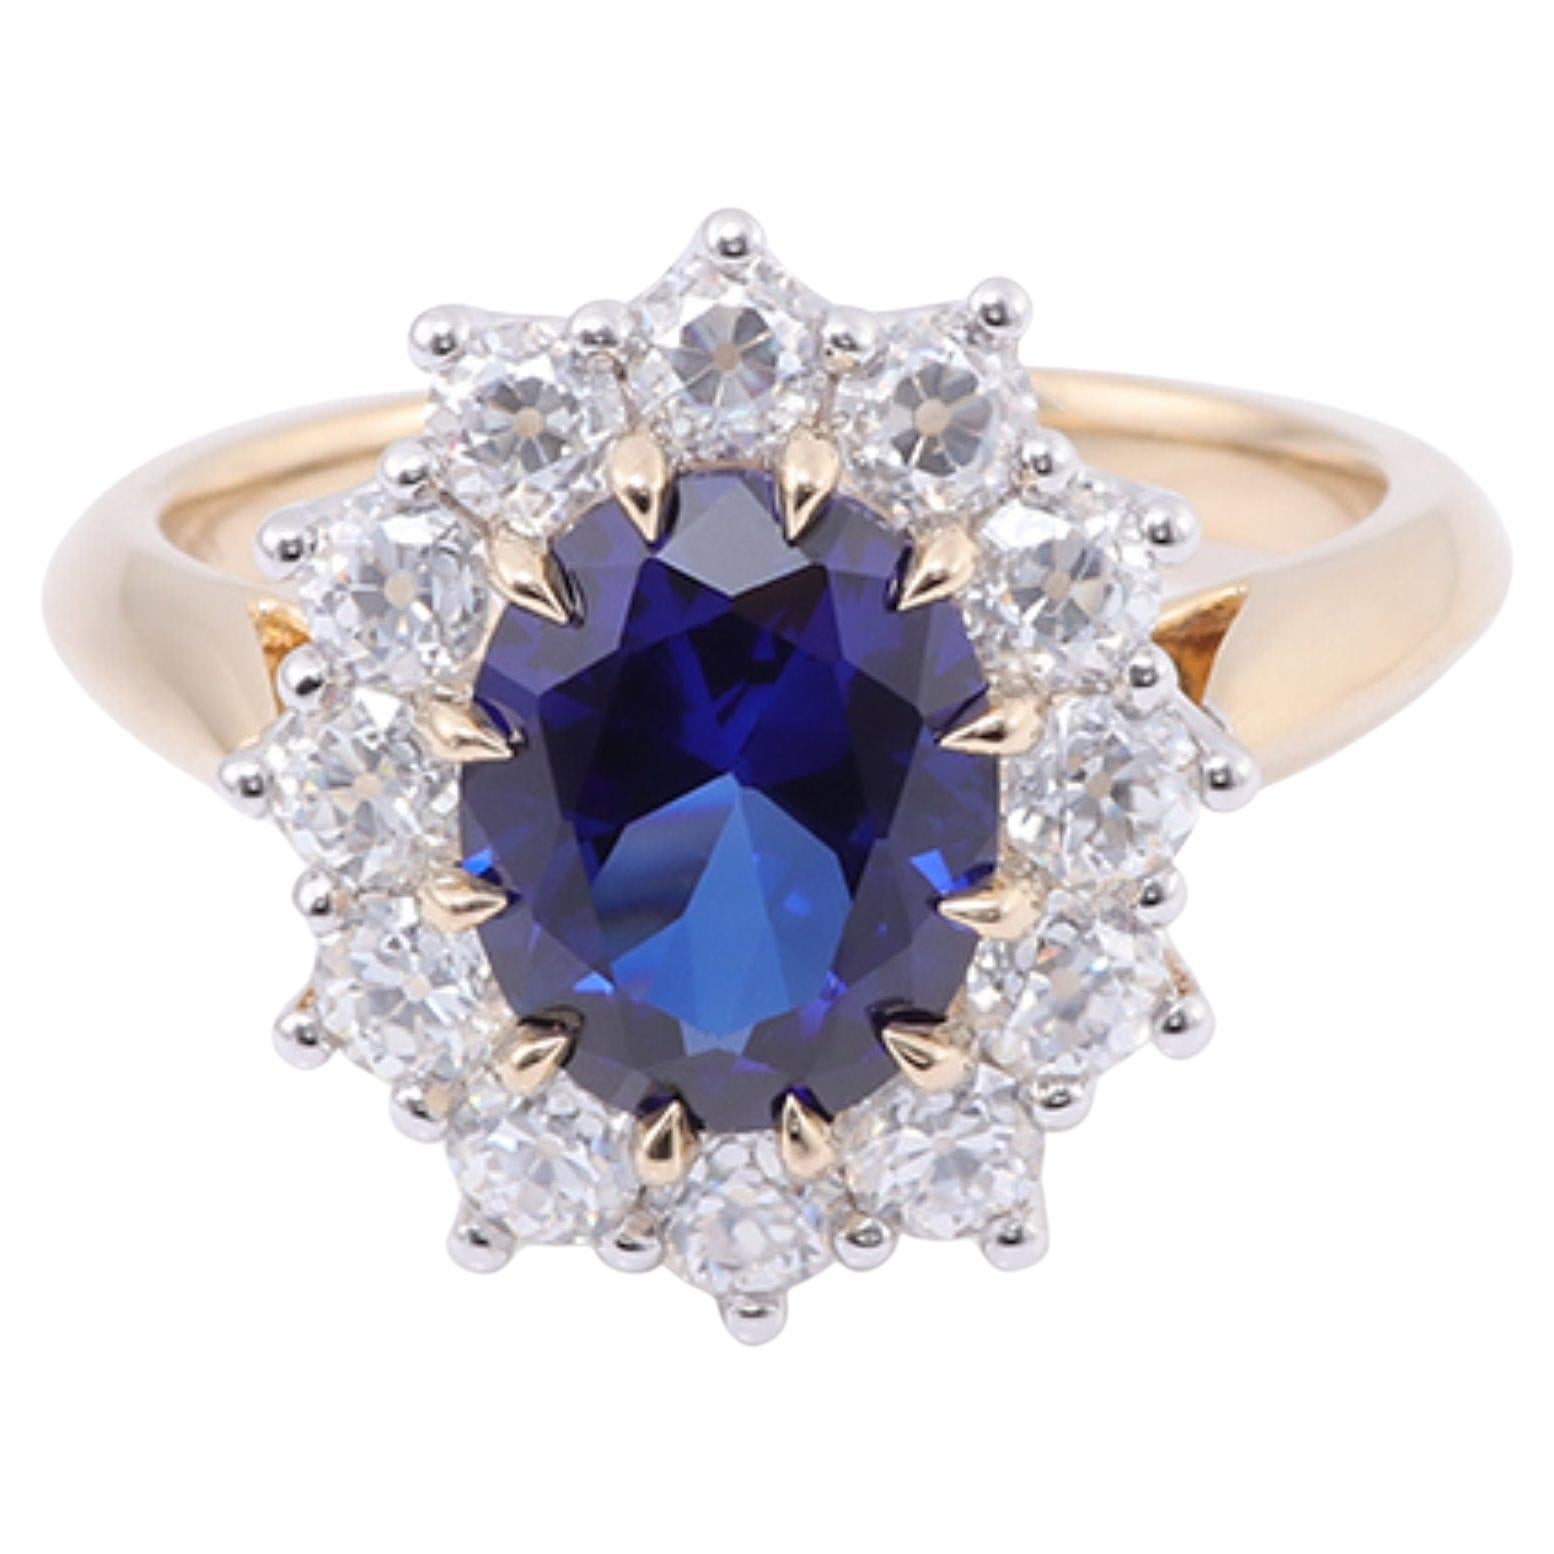 For Sale:  2 Carat Natural Sapphire Diamond Engagement Ring Set in 18K Gold, Cocktail Ring